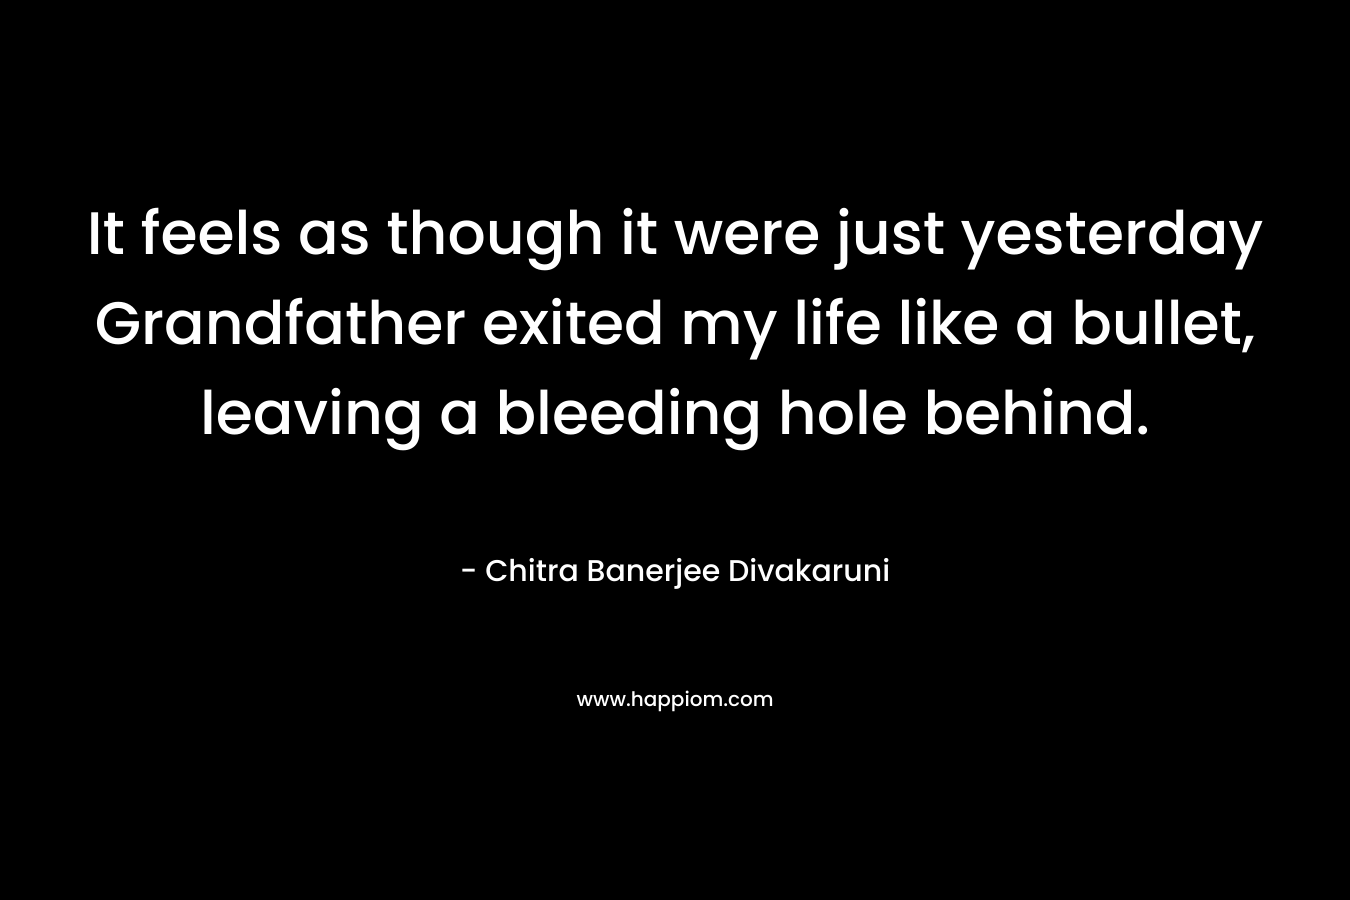 It feels as though it were just yesterday Grandfather exited my life like a bullet, leaving a bleeding hole behind.